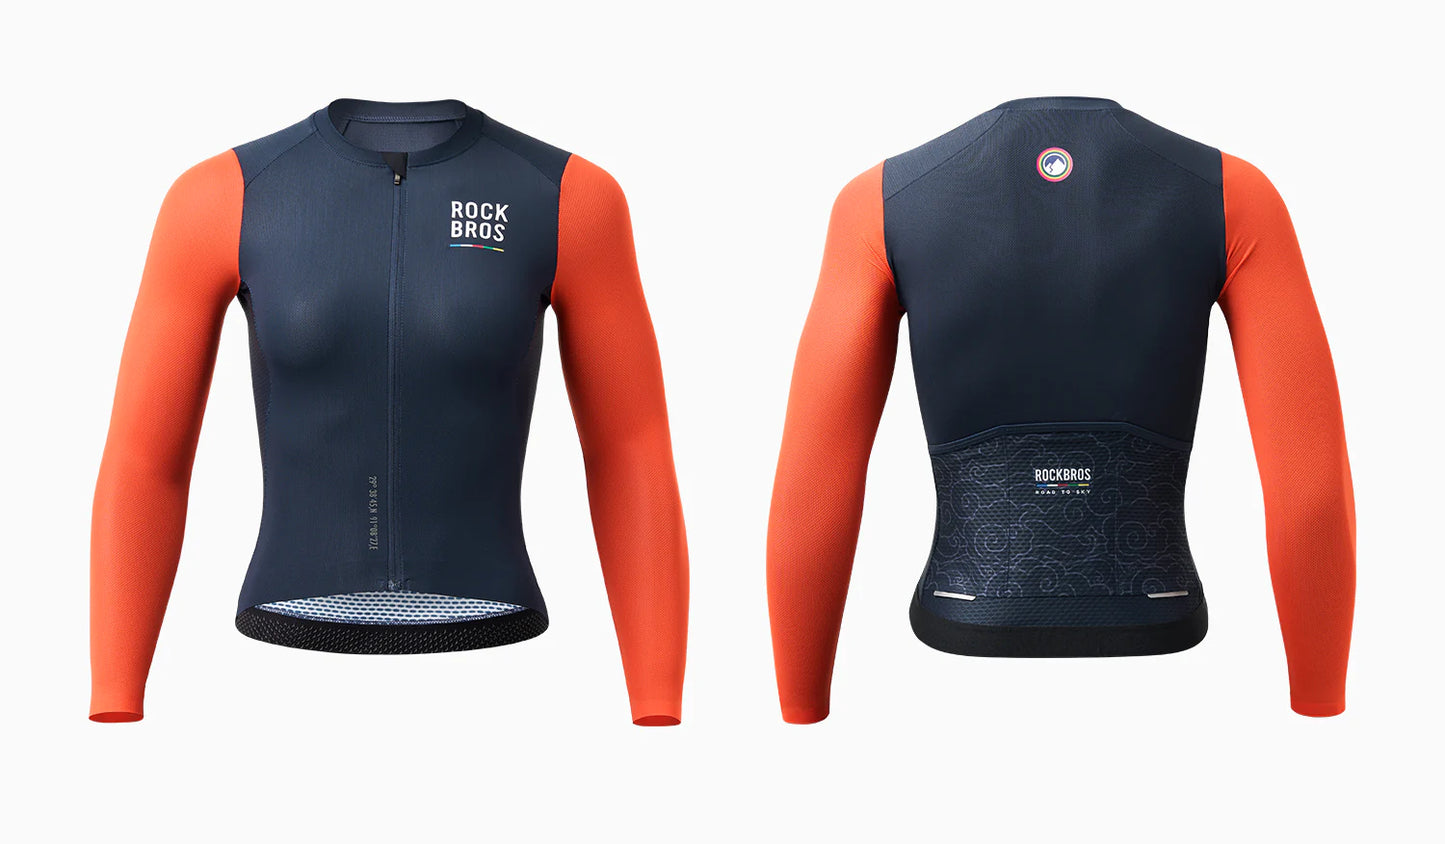 ROAD TO SKY Women's Cycling Long-Sleeved Jersey